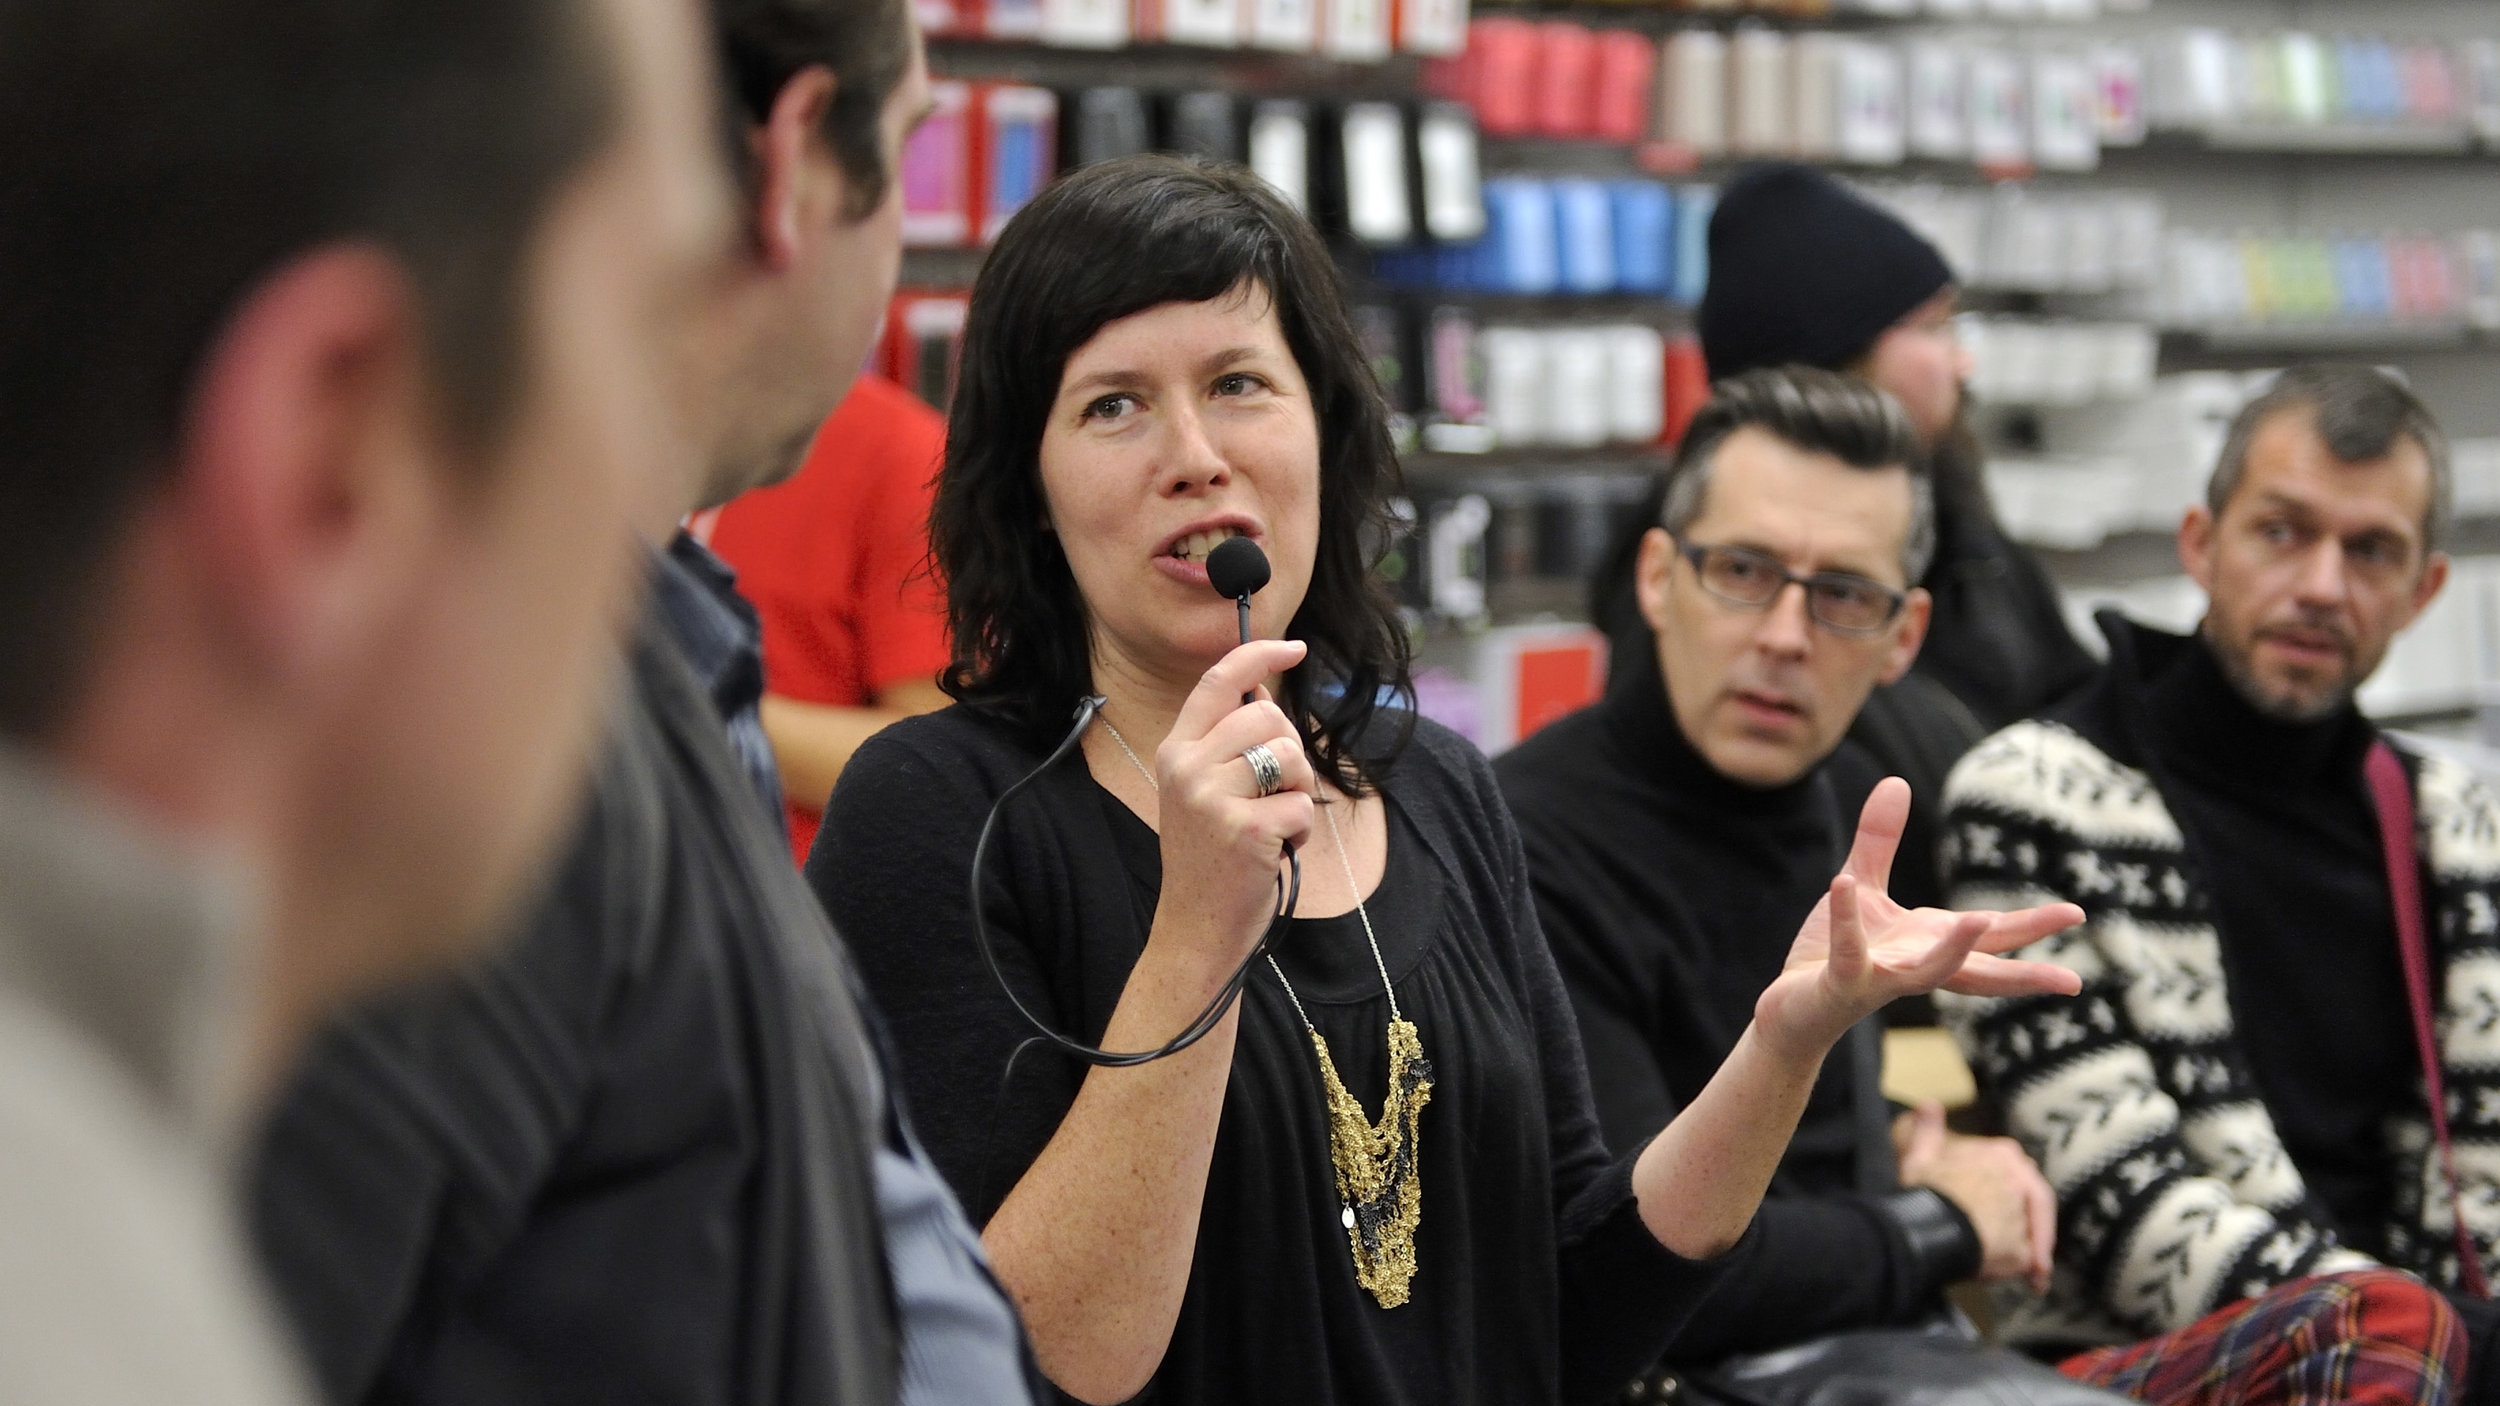 MAM-conference-Apple-Store-D-Beaumont-11-28-2013-179.jpg